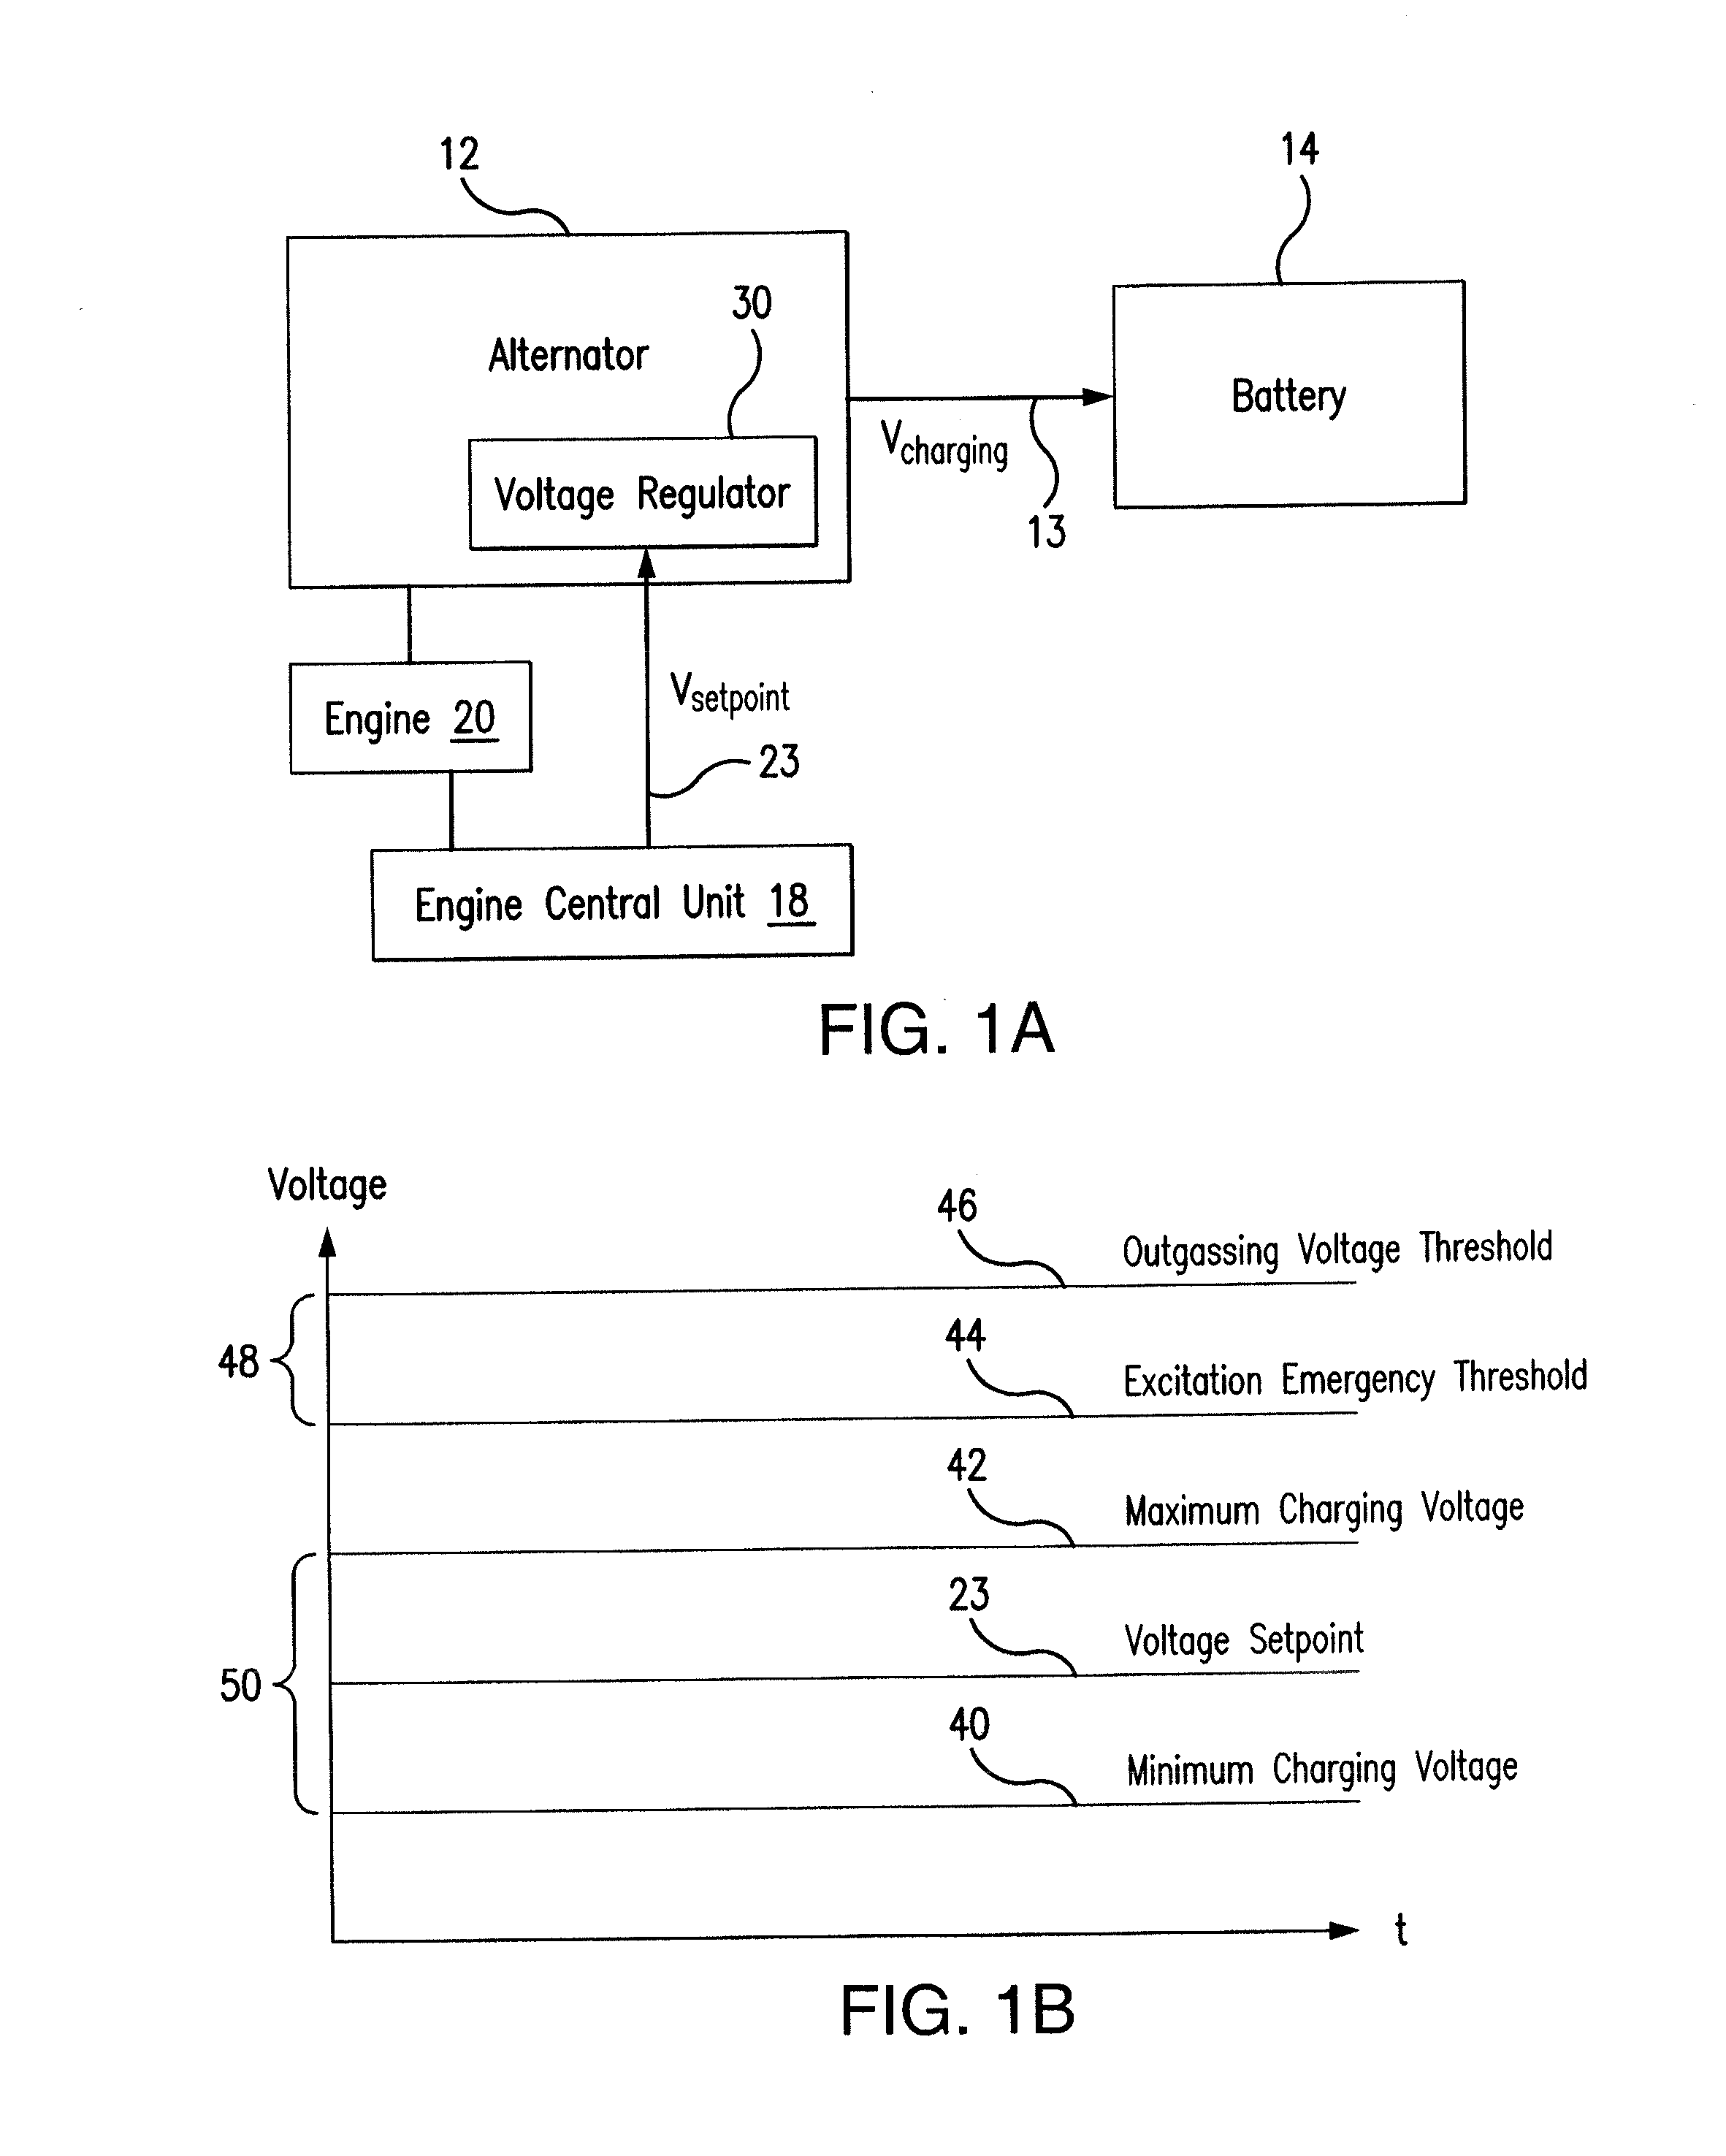 Alternator Control with Temperature-Dependent Safety Feature